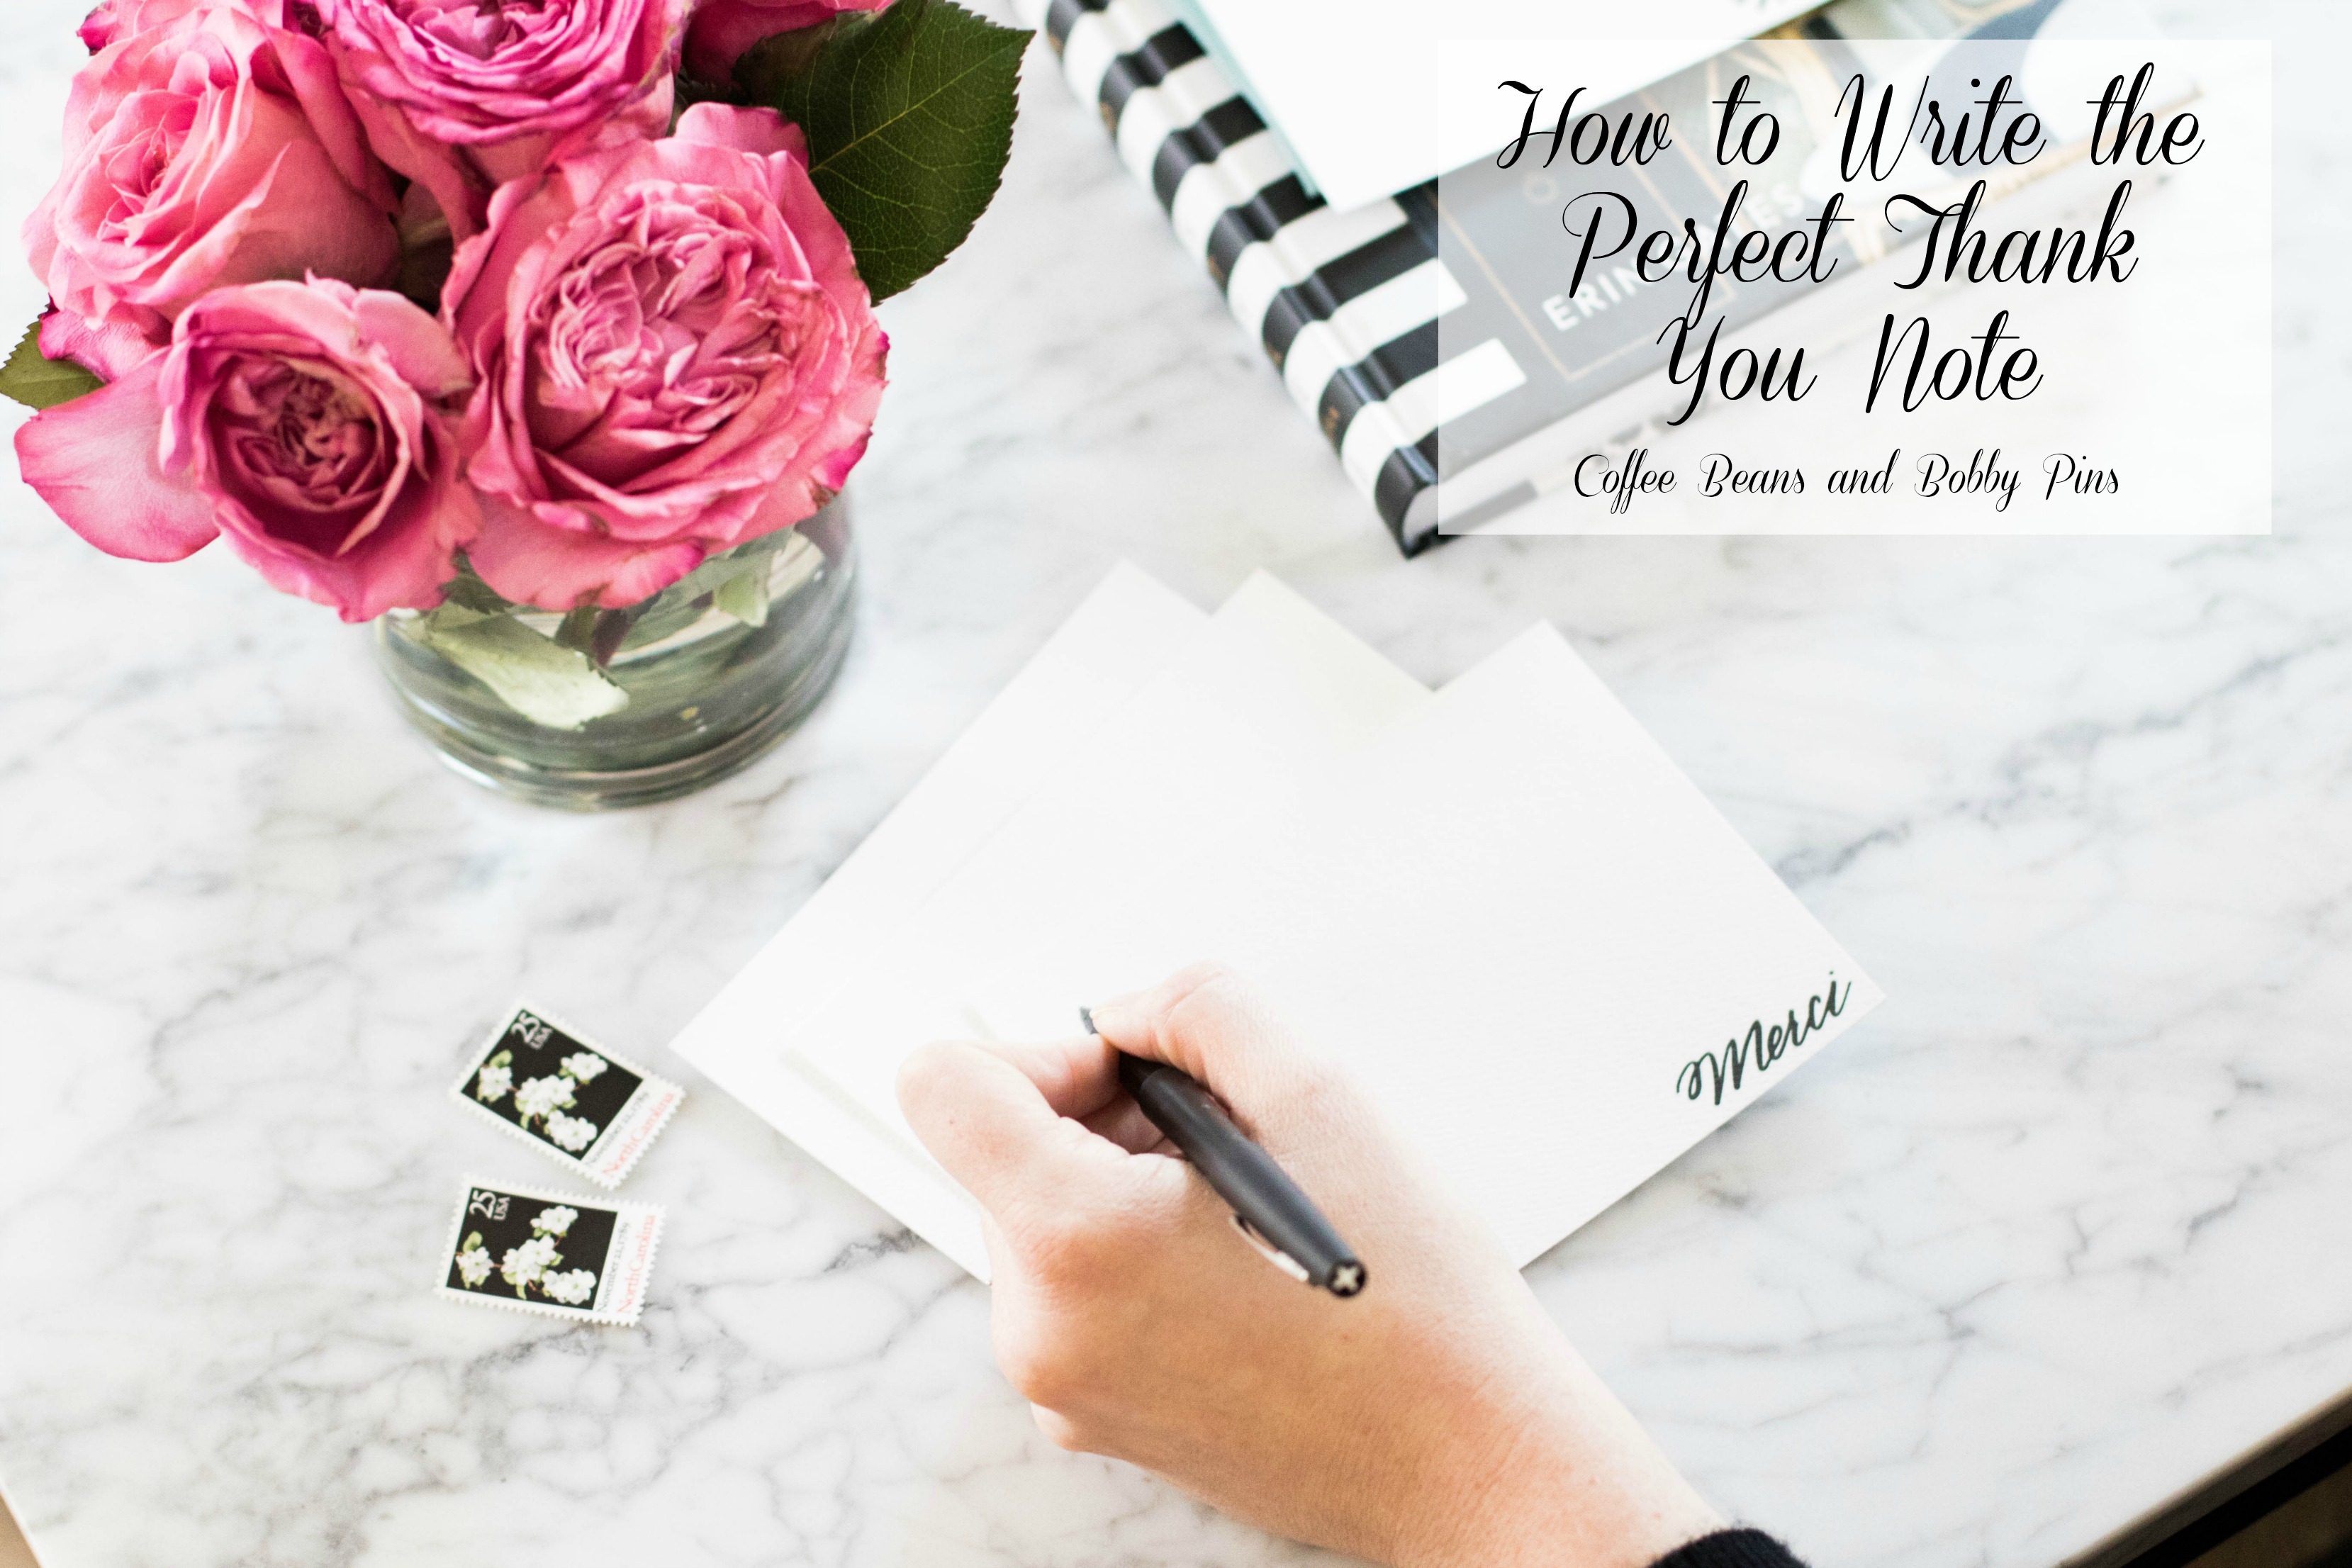 How to Write A Thank You Note by lifestyle blogger Amy of Coffee Beans and Bobby Pins